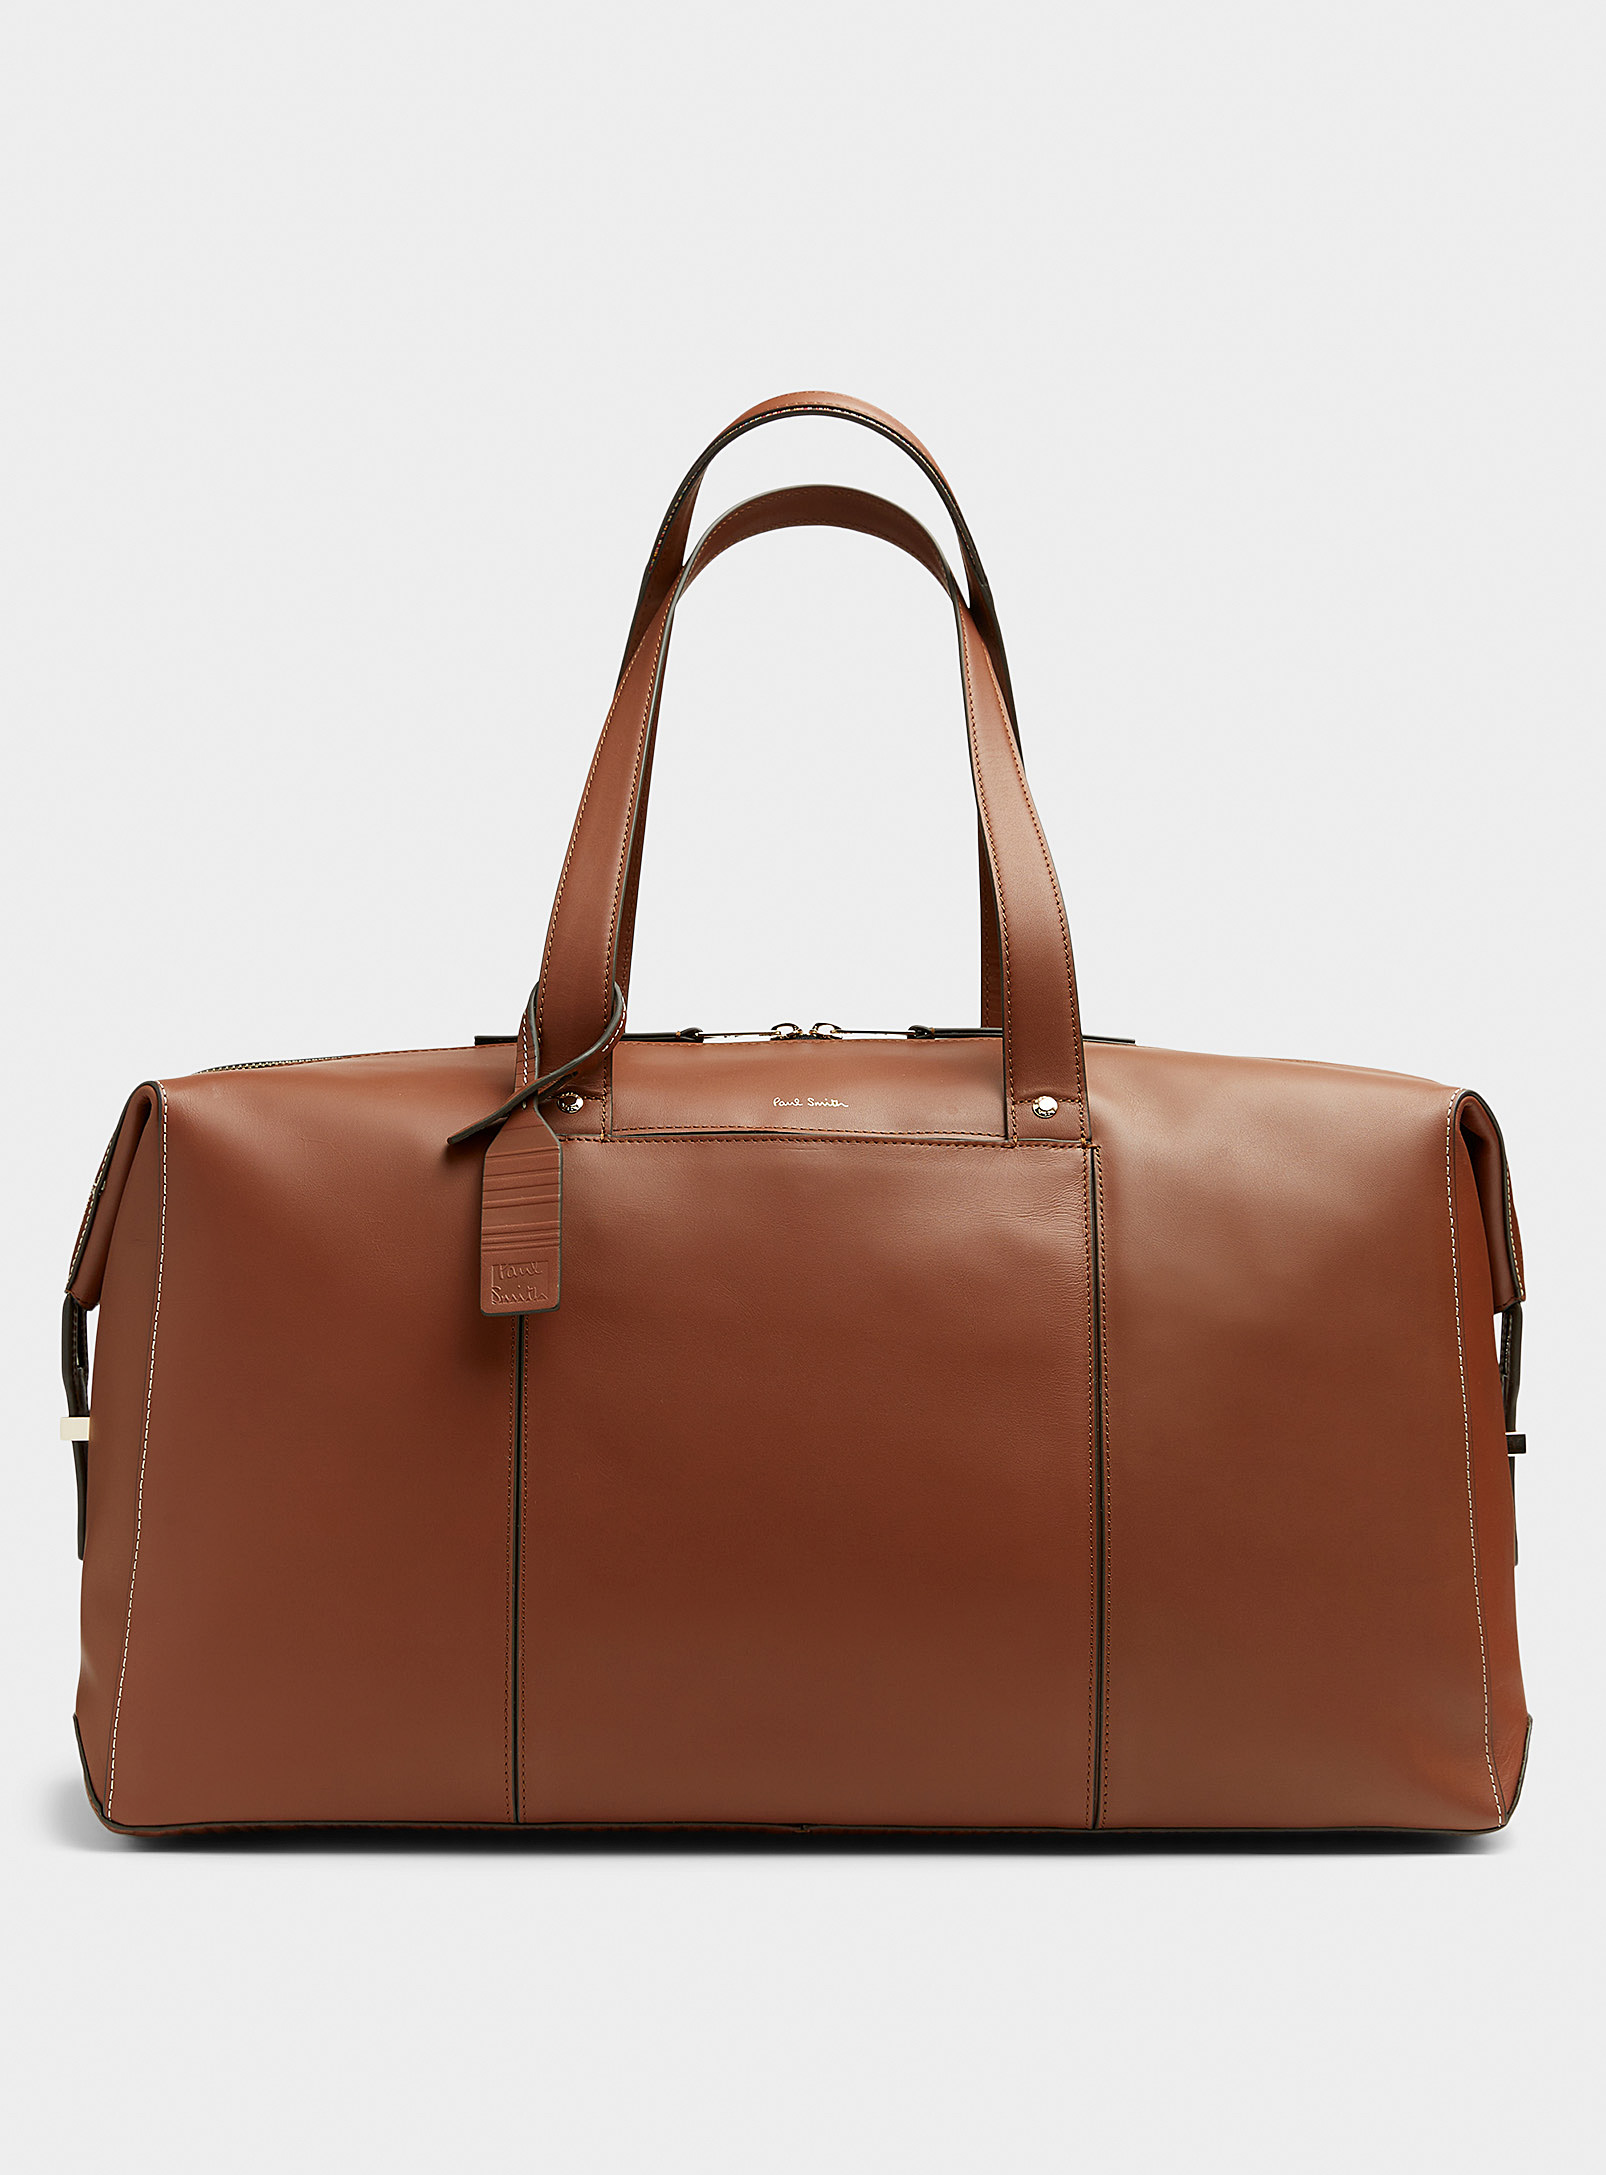 Paul Smith - Men's Brown leather Tote Bag